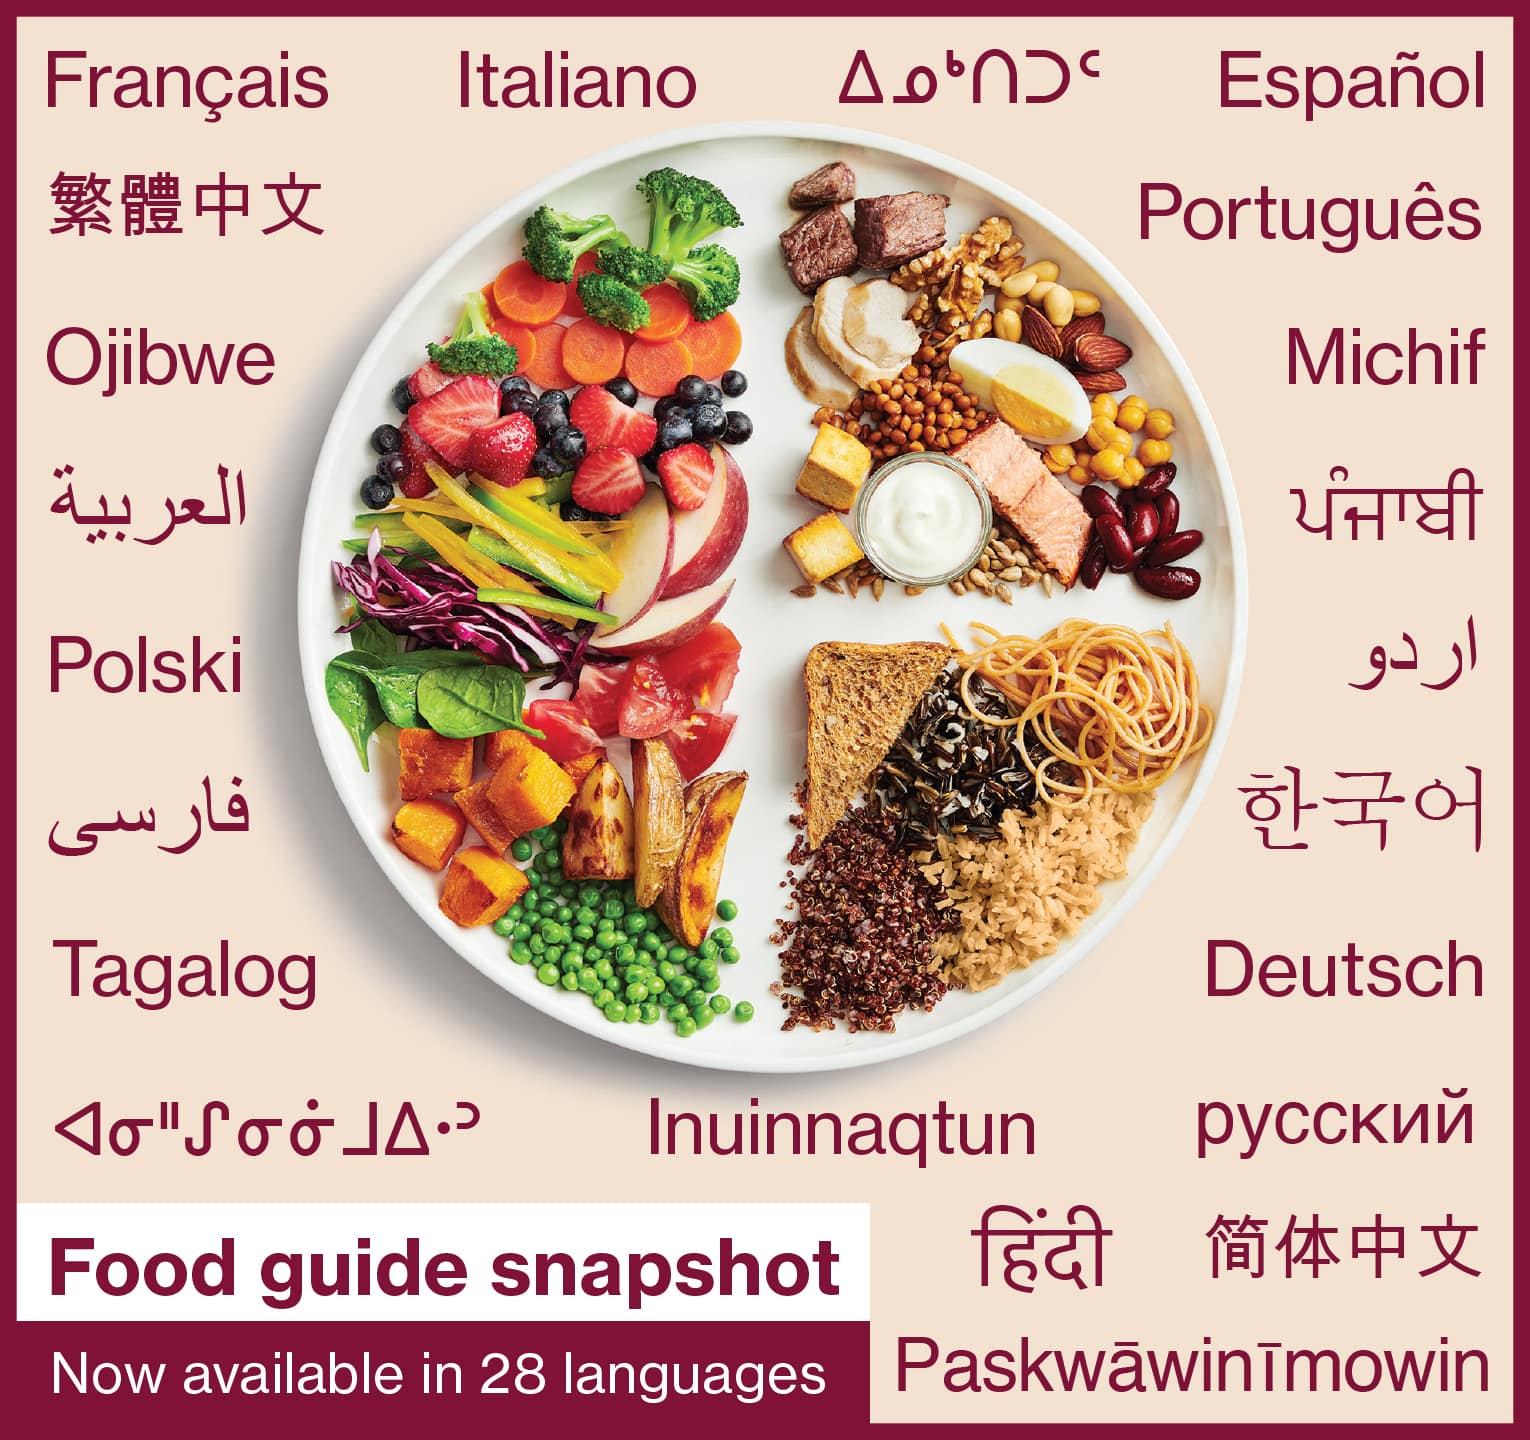 Food guide snapshot with different language translations